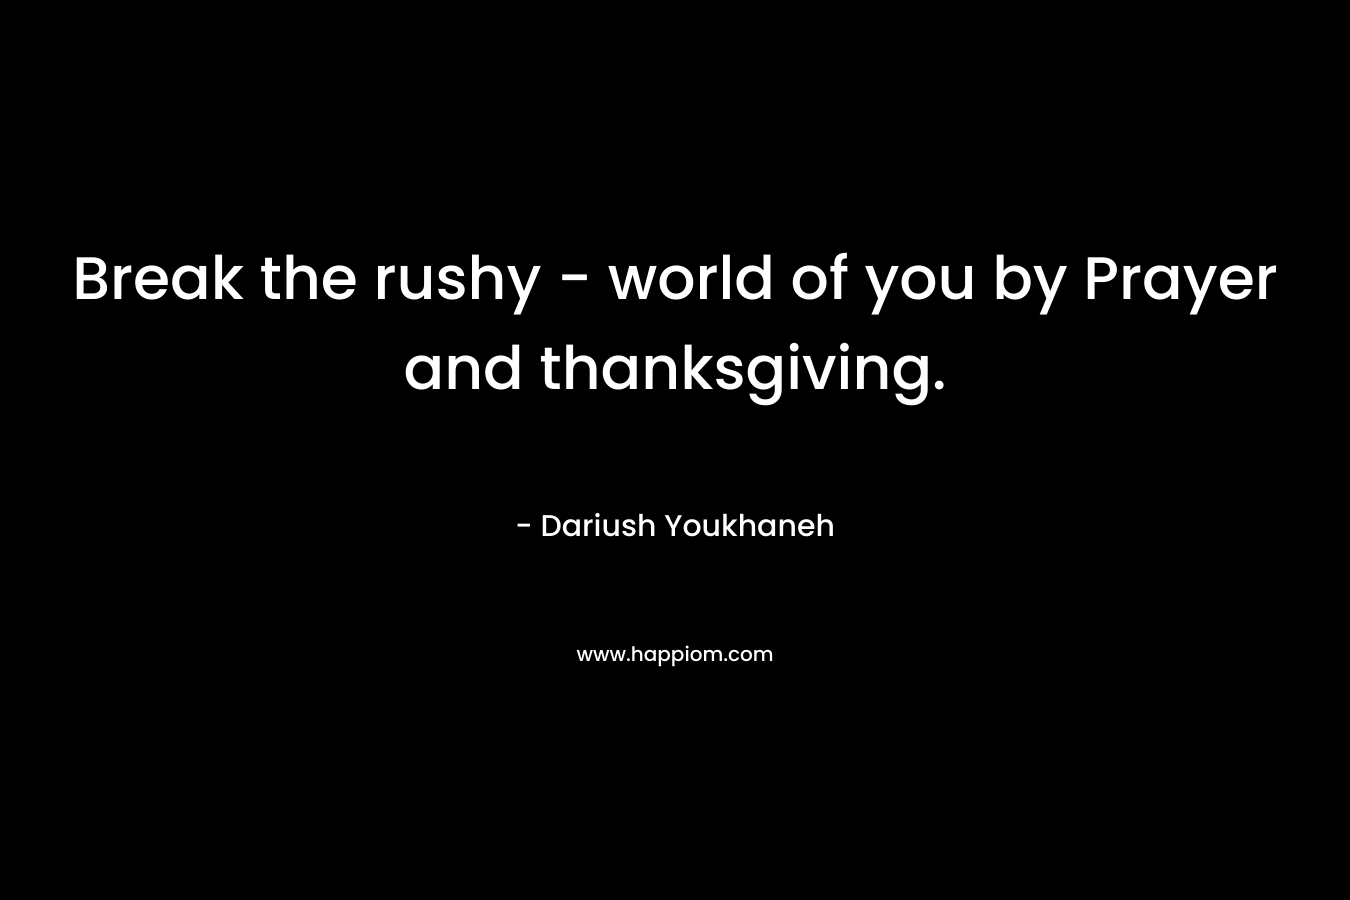 Break the rushy - world of you by Prayer and thanksgiving.